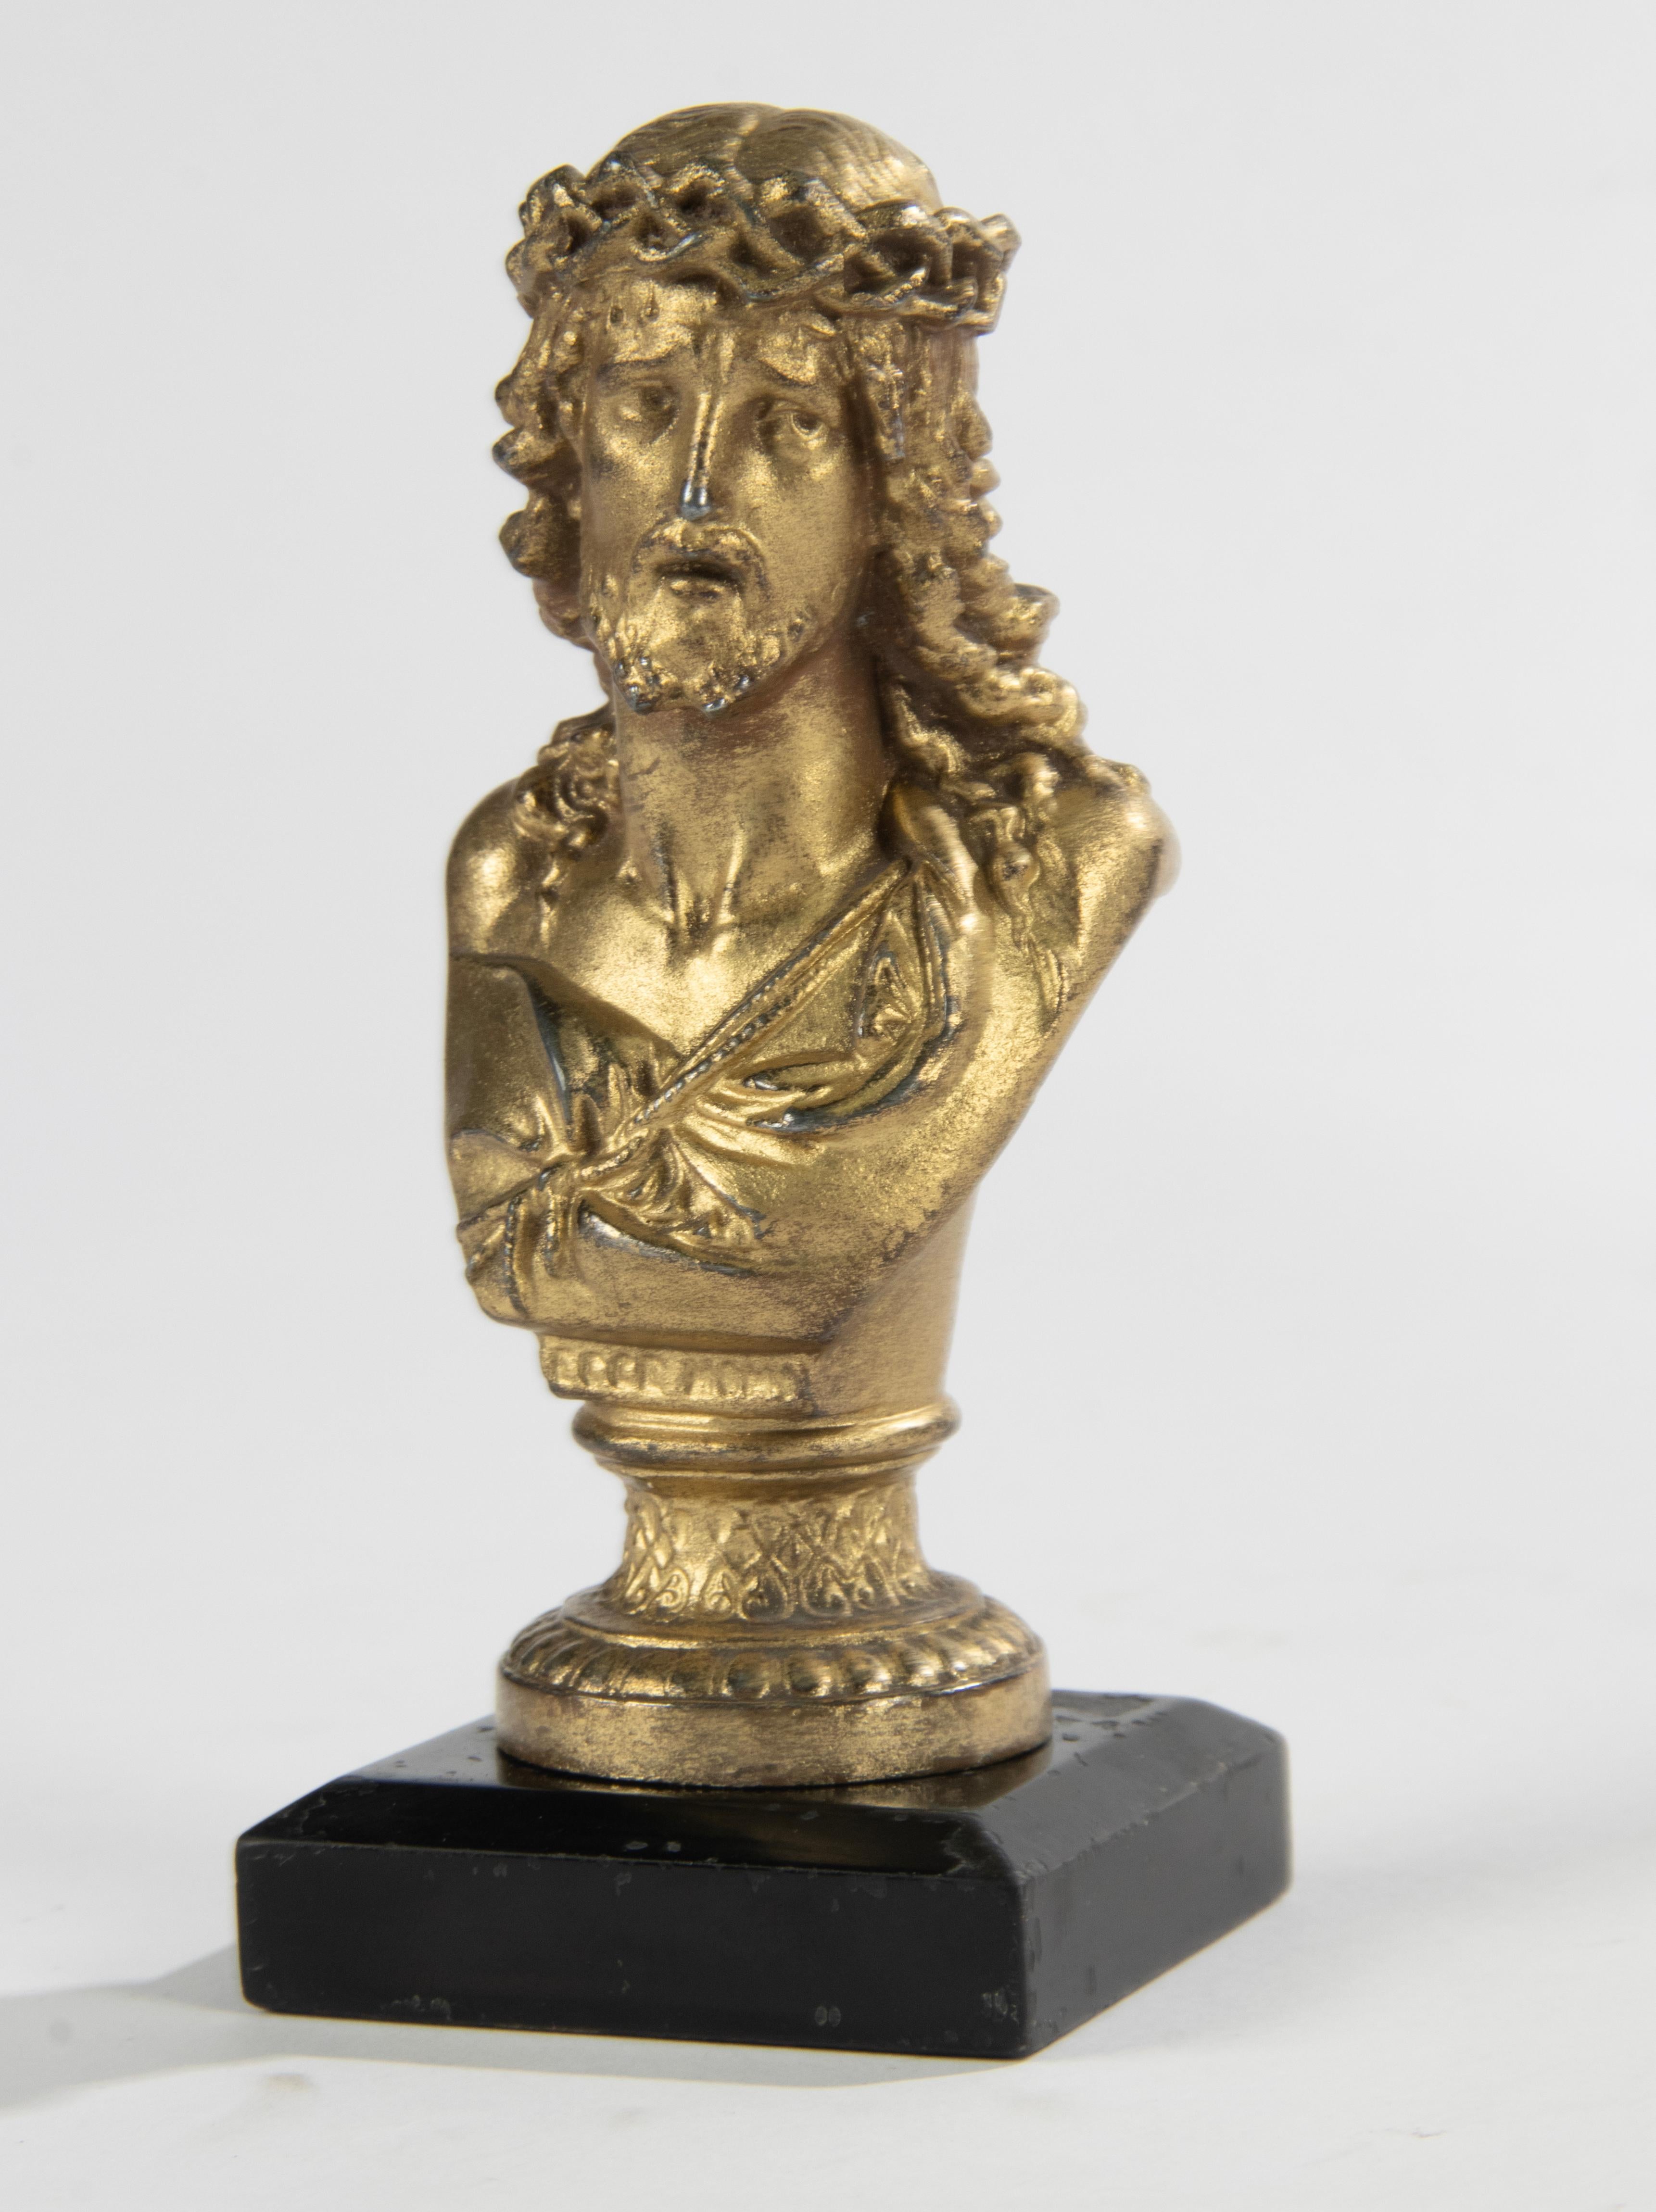 A small antique bust of Jesus Christ. Made of gilded spelter (zinc alloy). On a black marble plinth. No signature. Minor wear to the gilt patina.
Dimensions: 14 (h) x 6 x 6 cm
Free shipping.